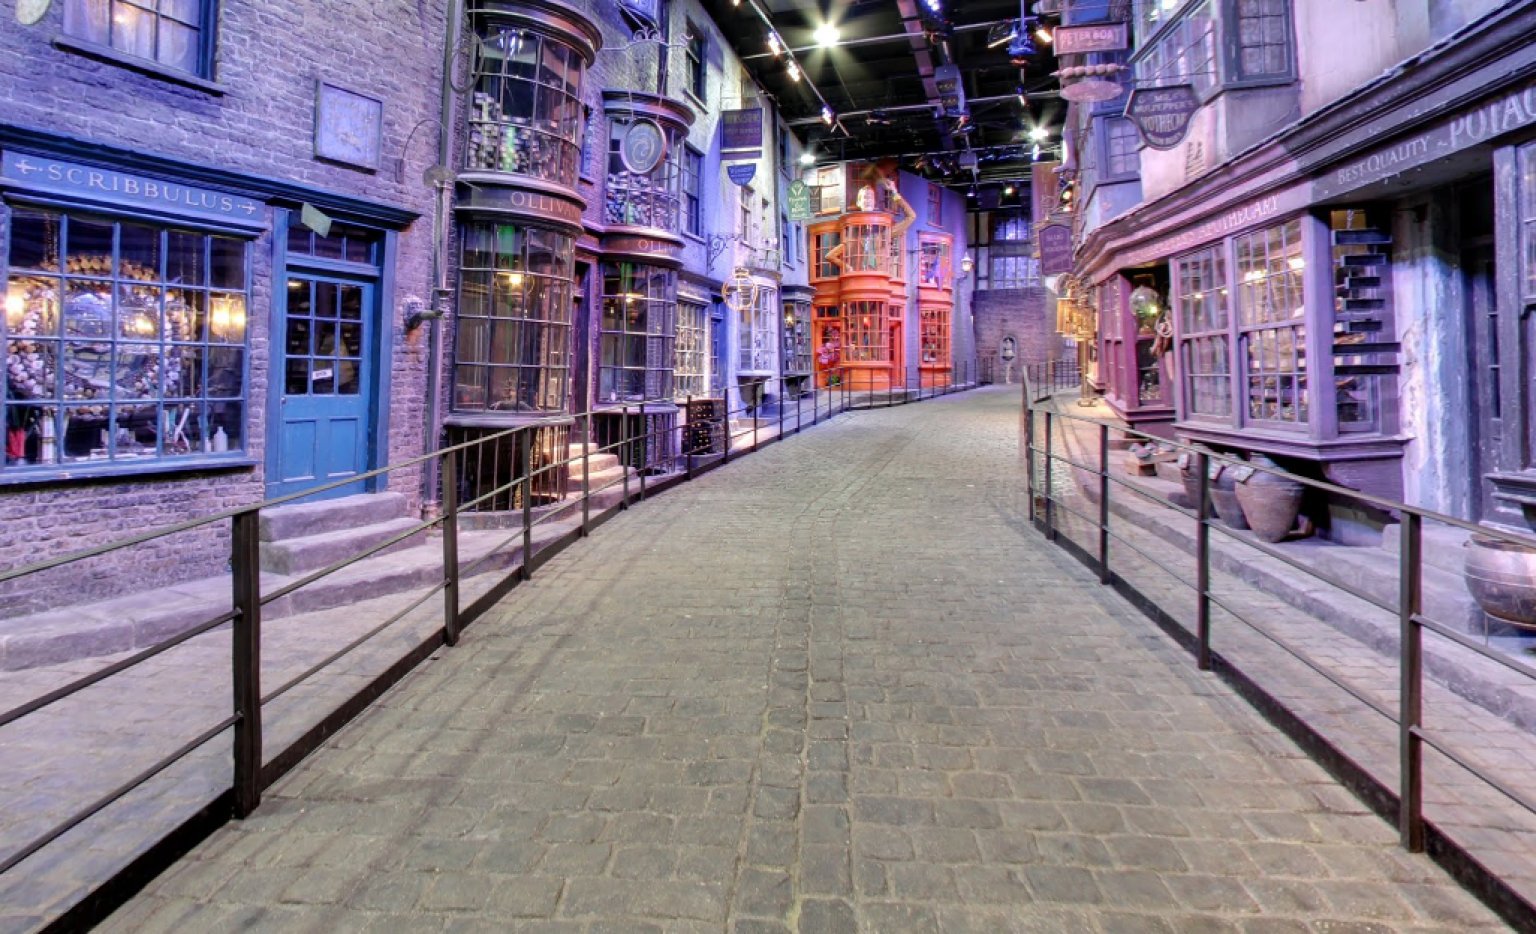 Google Is Even Mapping The Fictional World Of Harry Potter1536 x 934